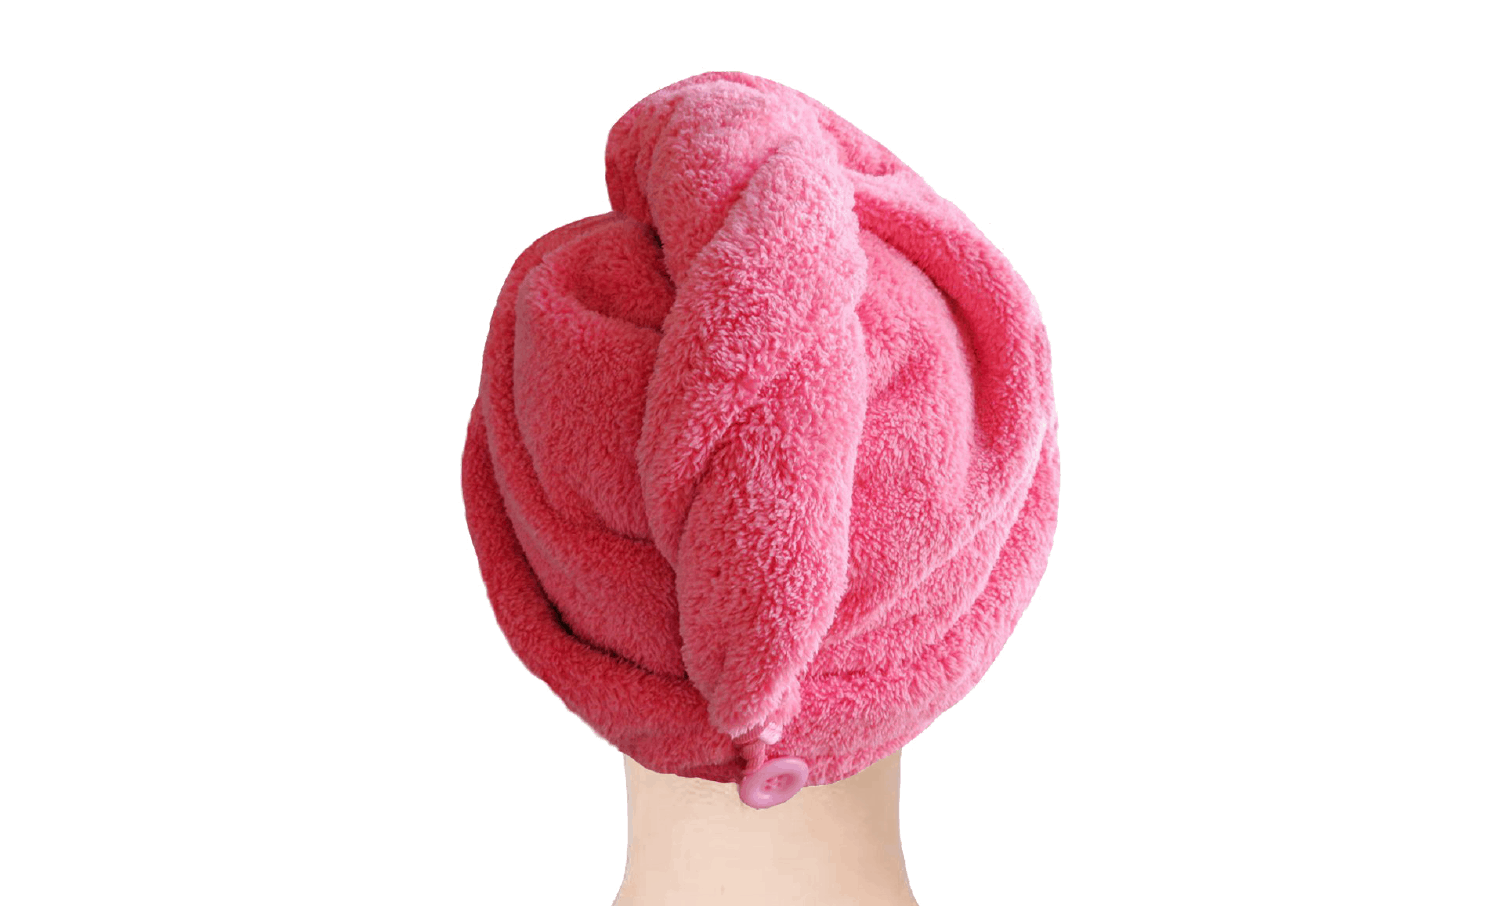 Easy to wrap pink towel